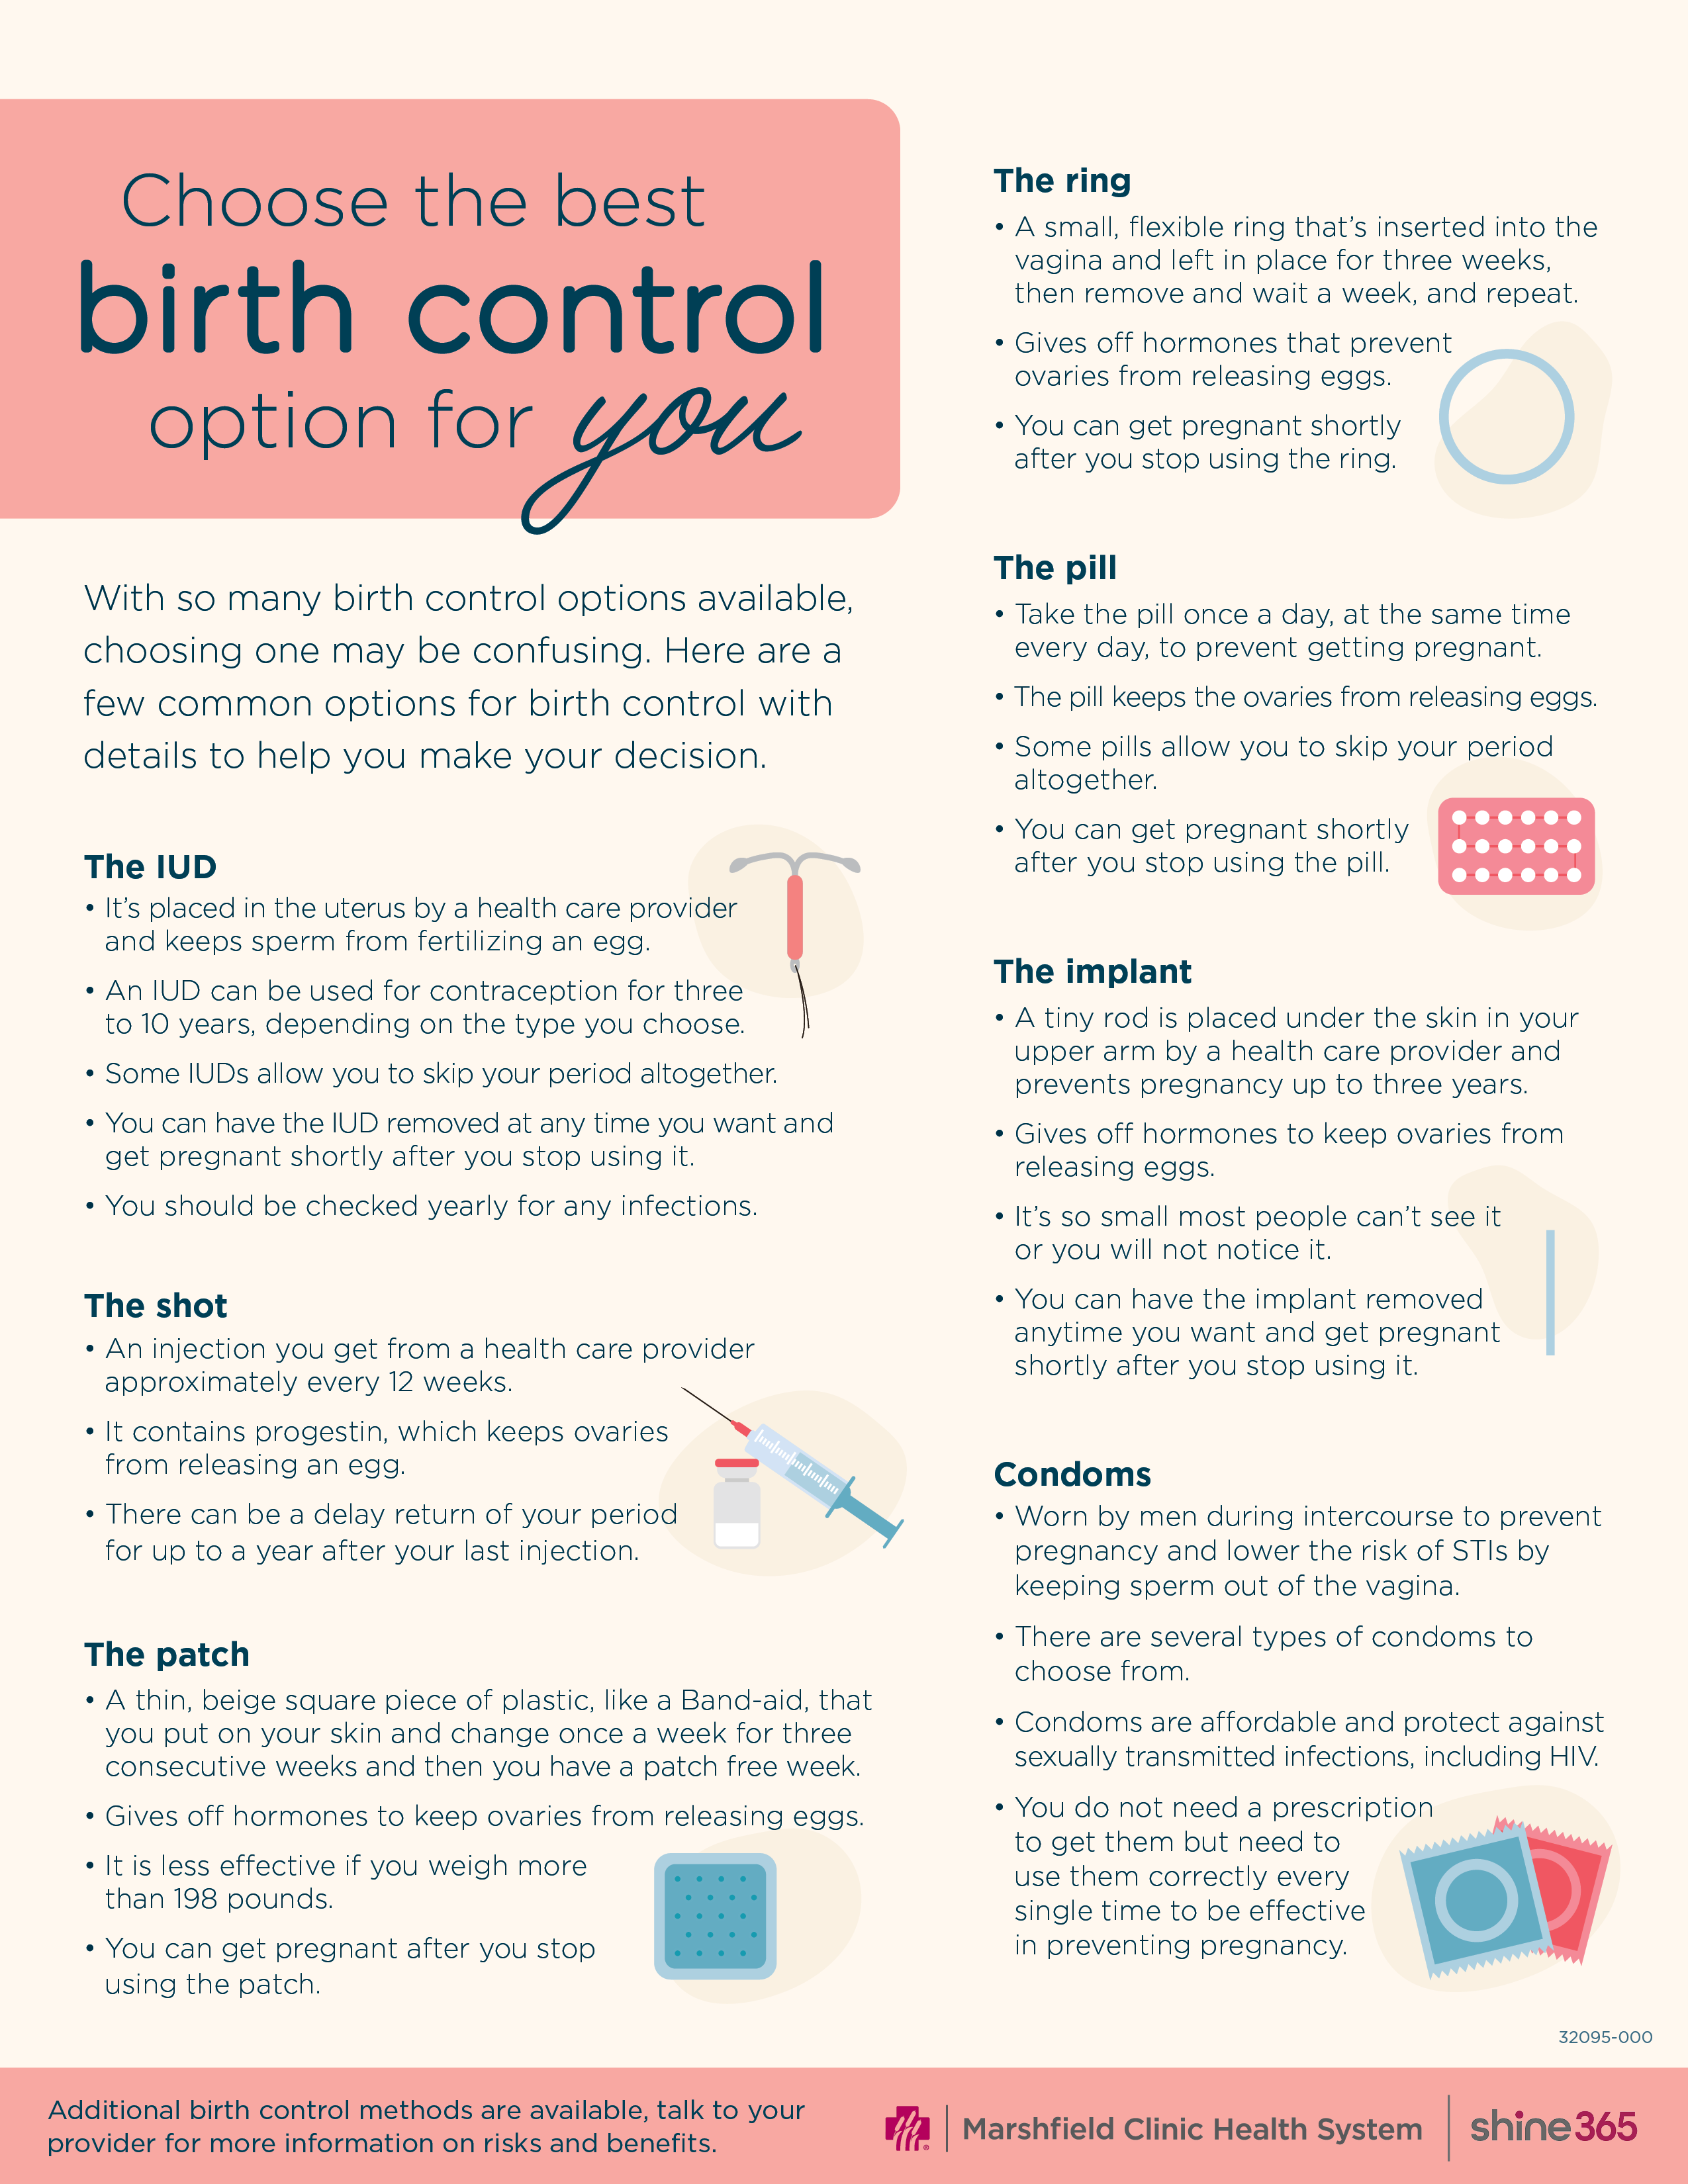 Infographic that explains different birth control methods with details to help make a decision on what fits your needs. 